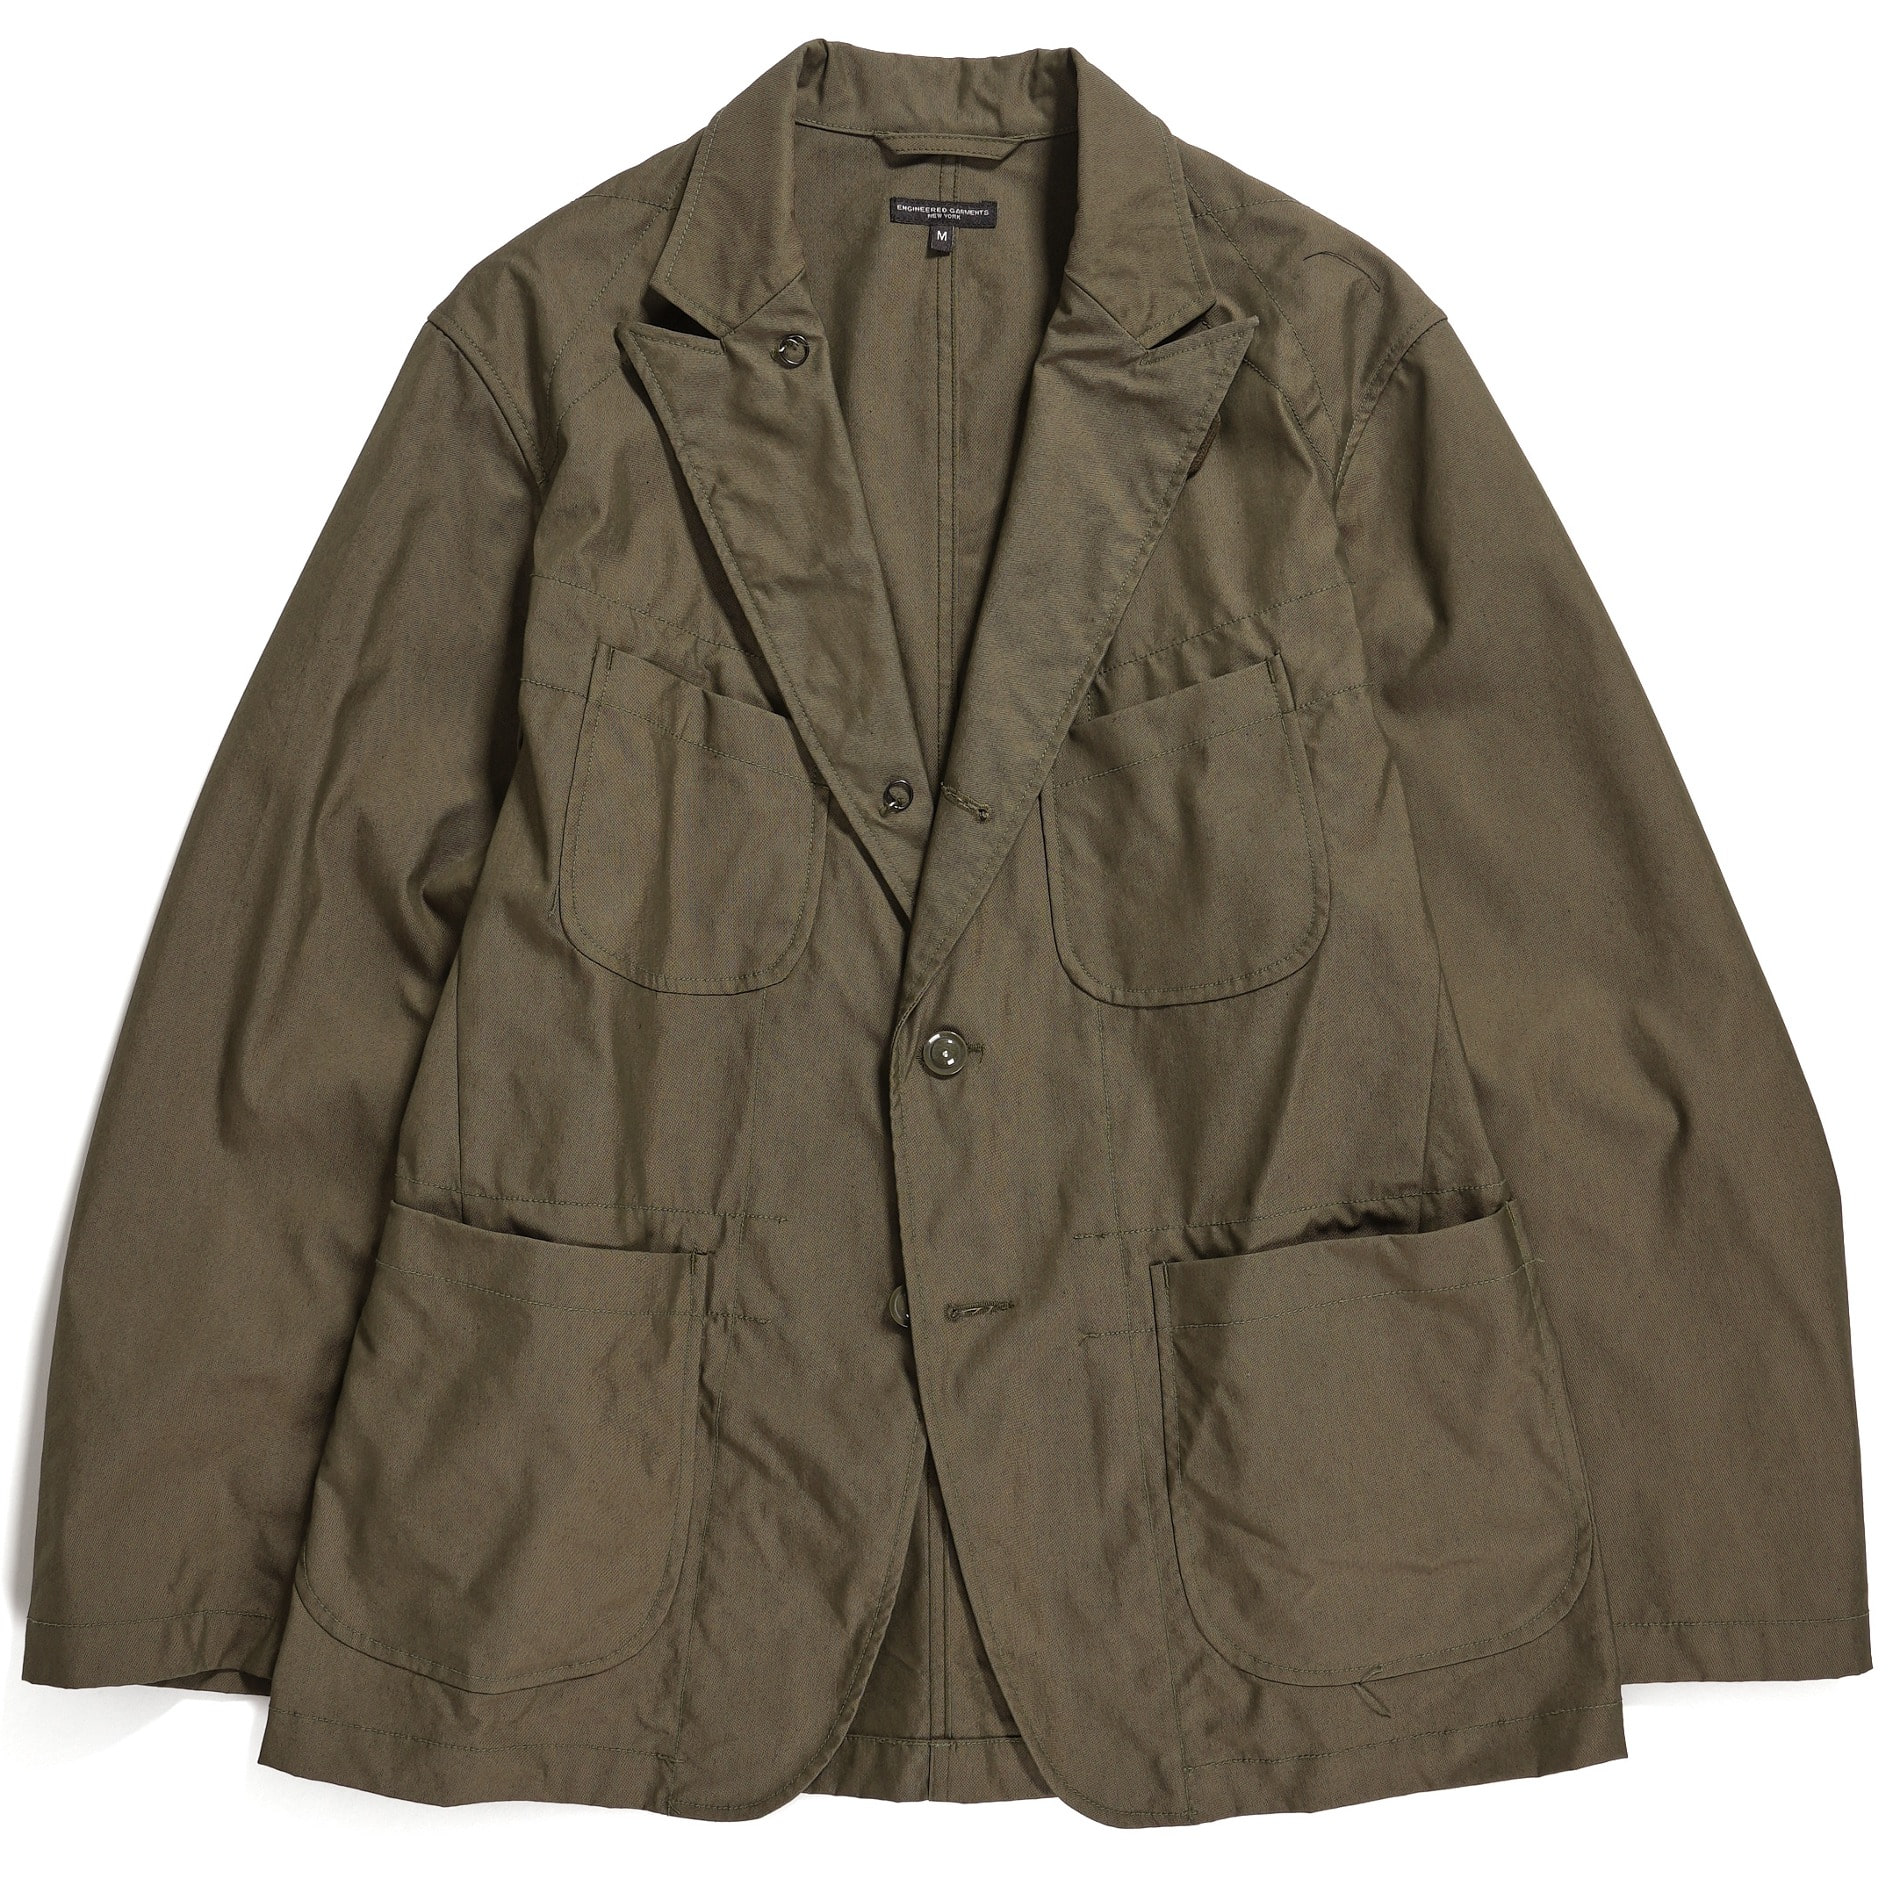 AW23 ENGINEERED GARMENTS  BEDFORD JACKET OLIVE CP WEATHER POPLIN